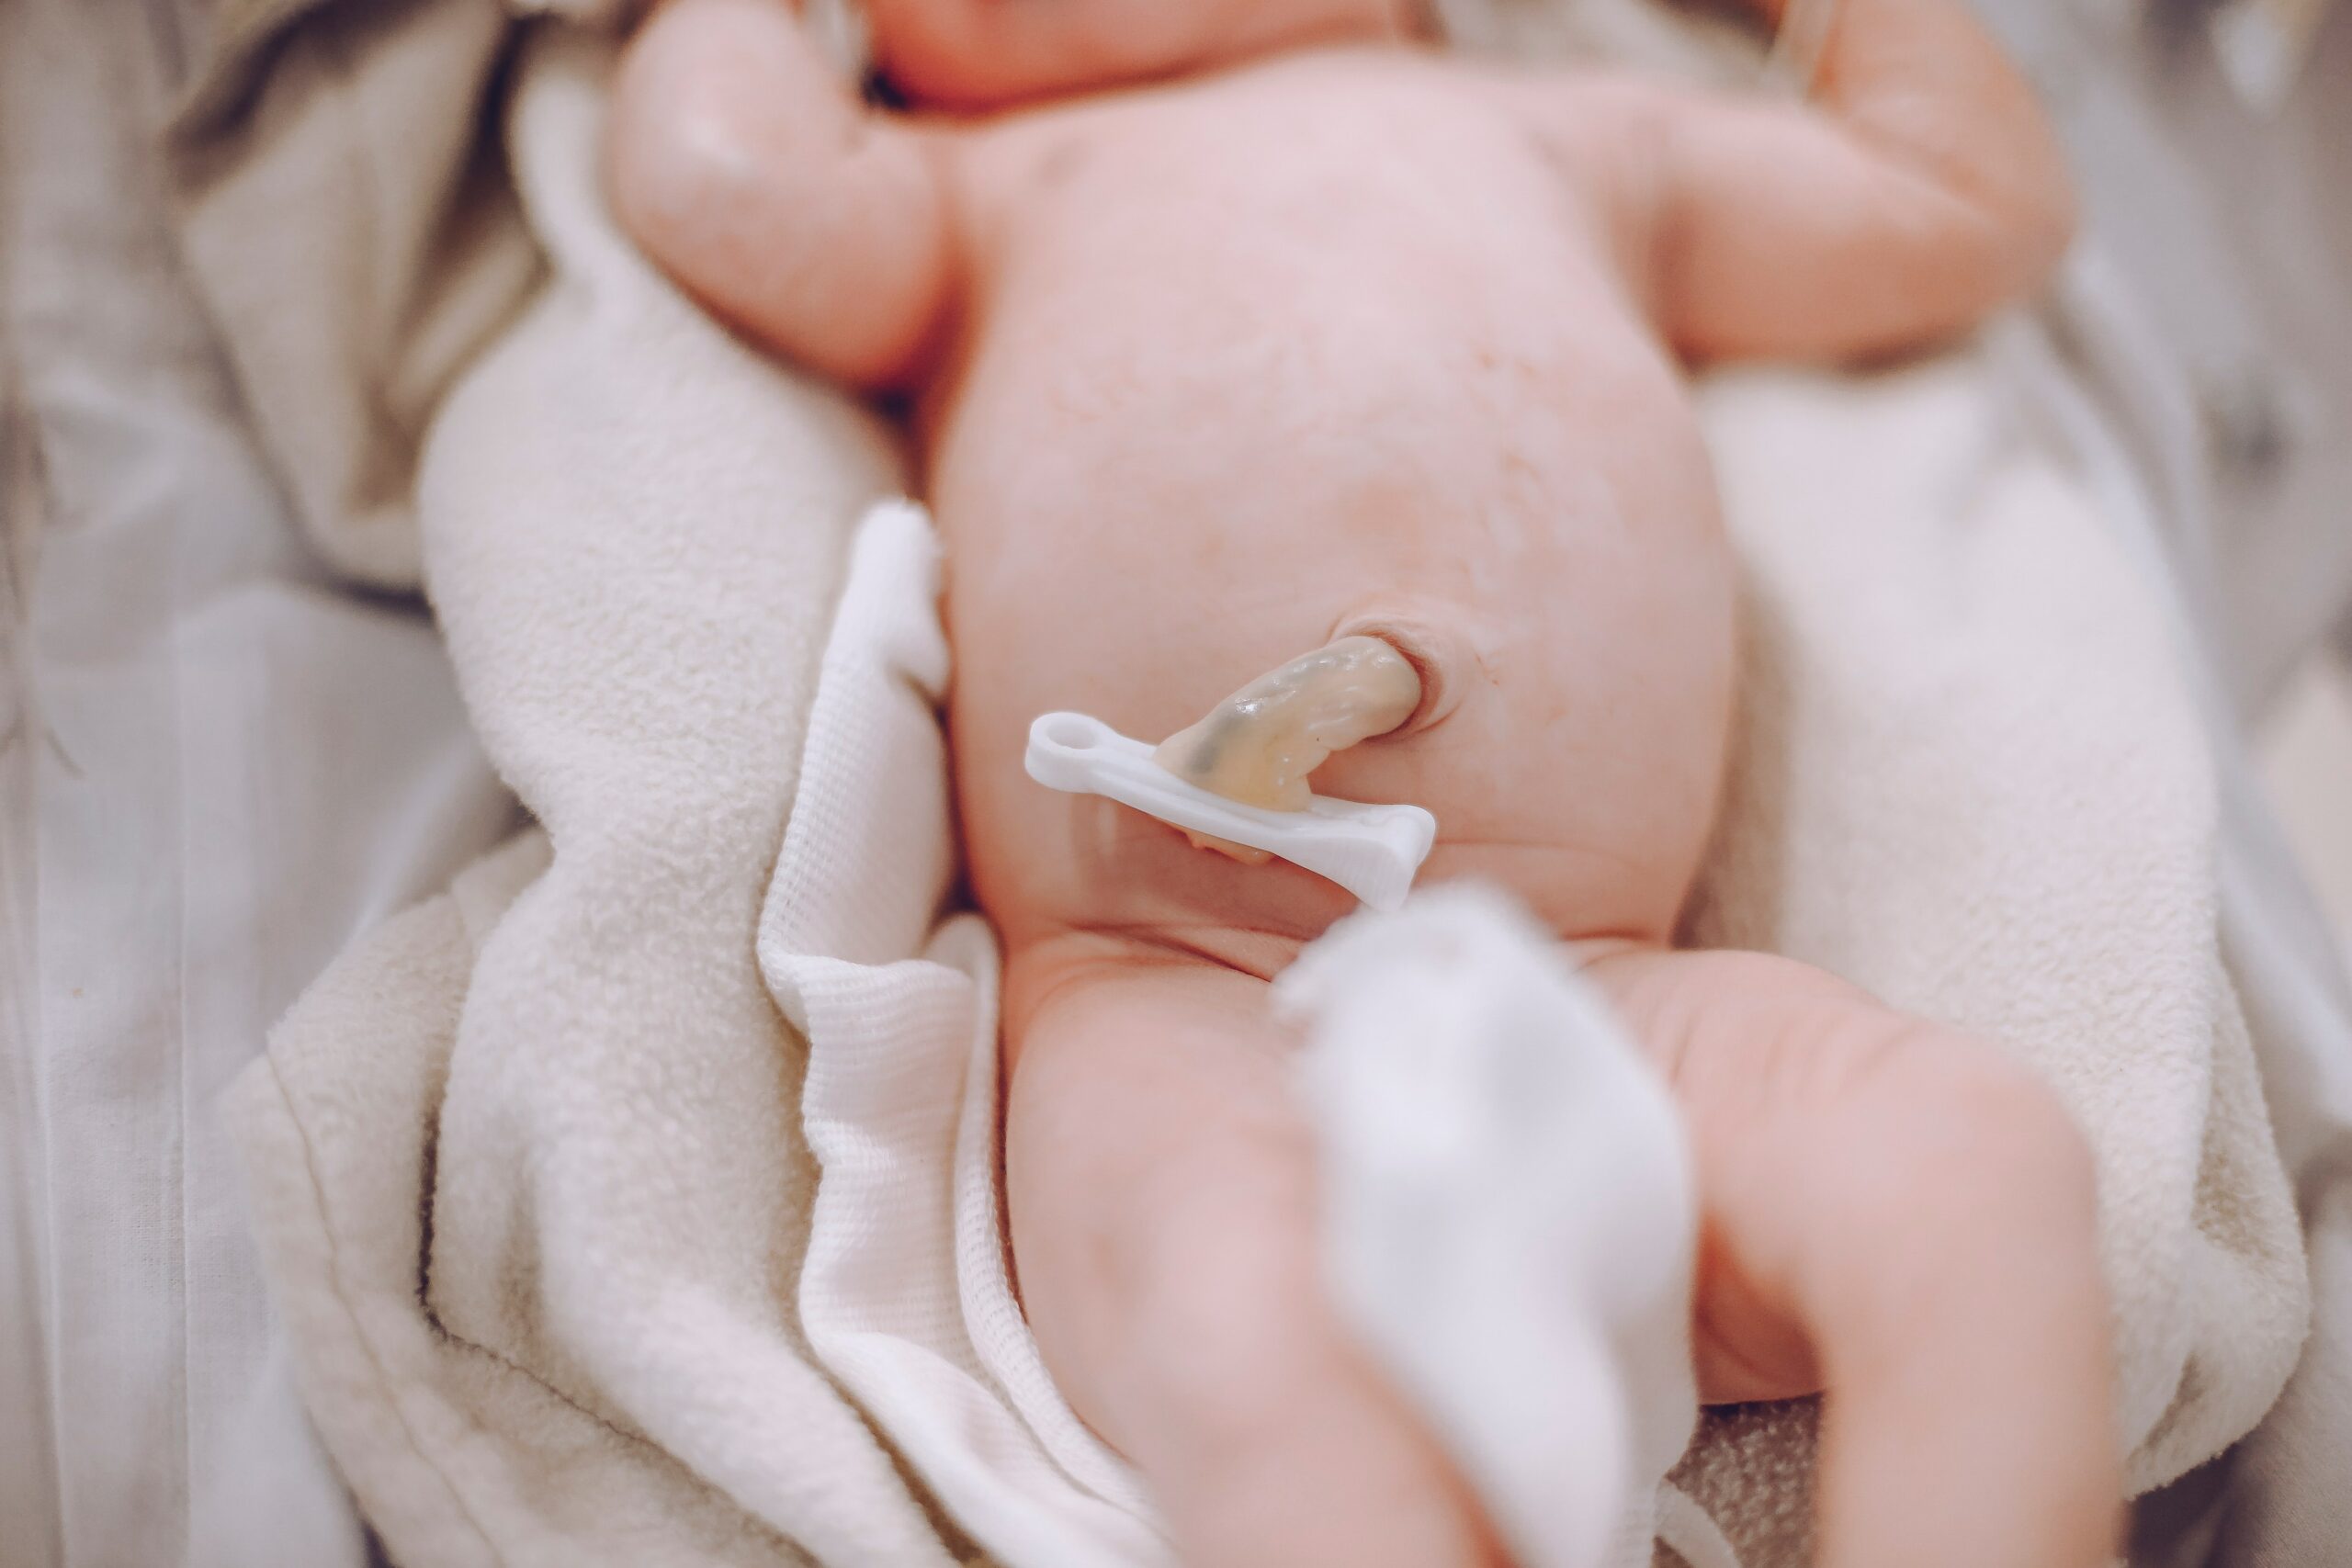 umbilical cord clamping